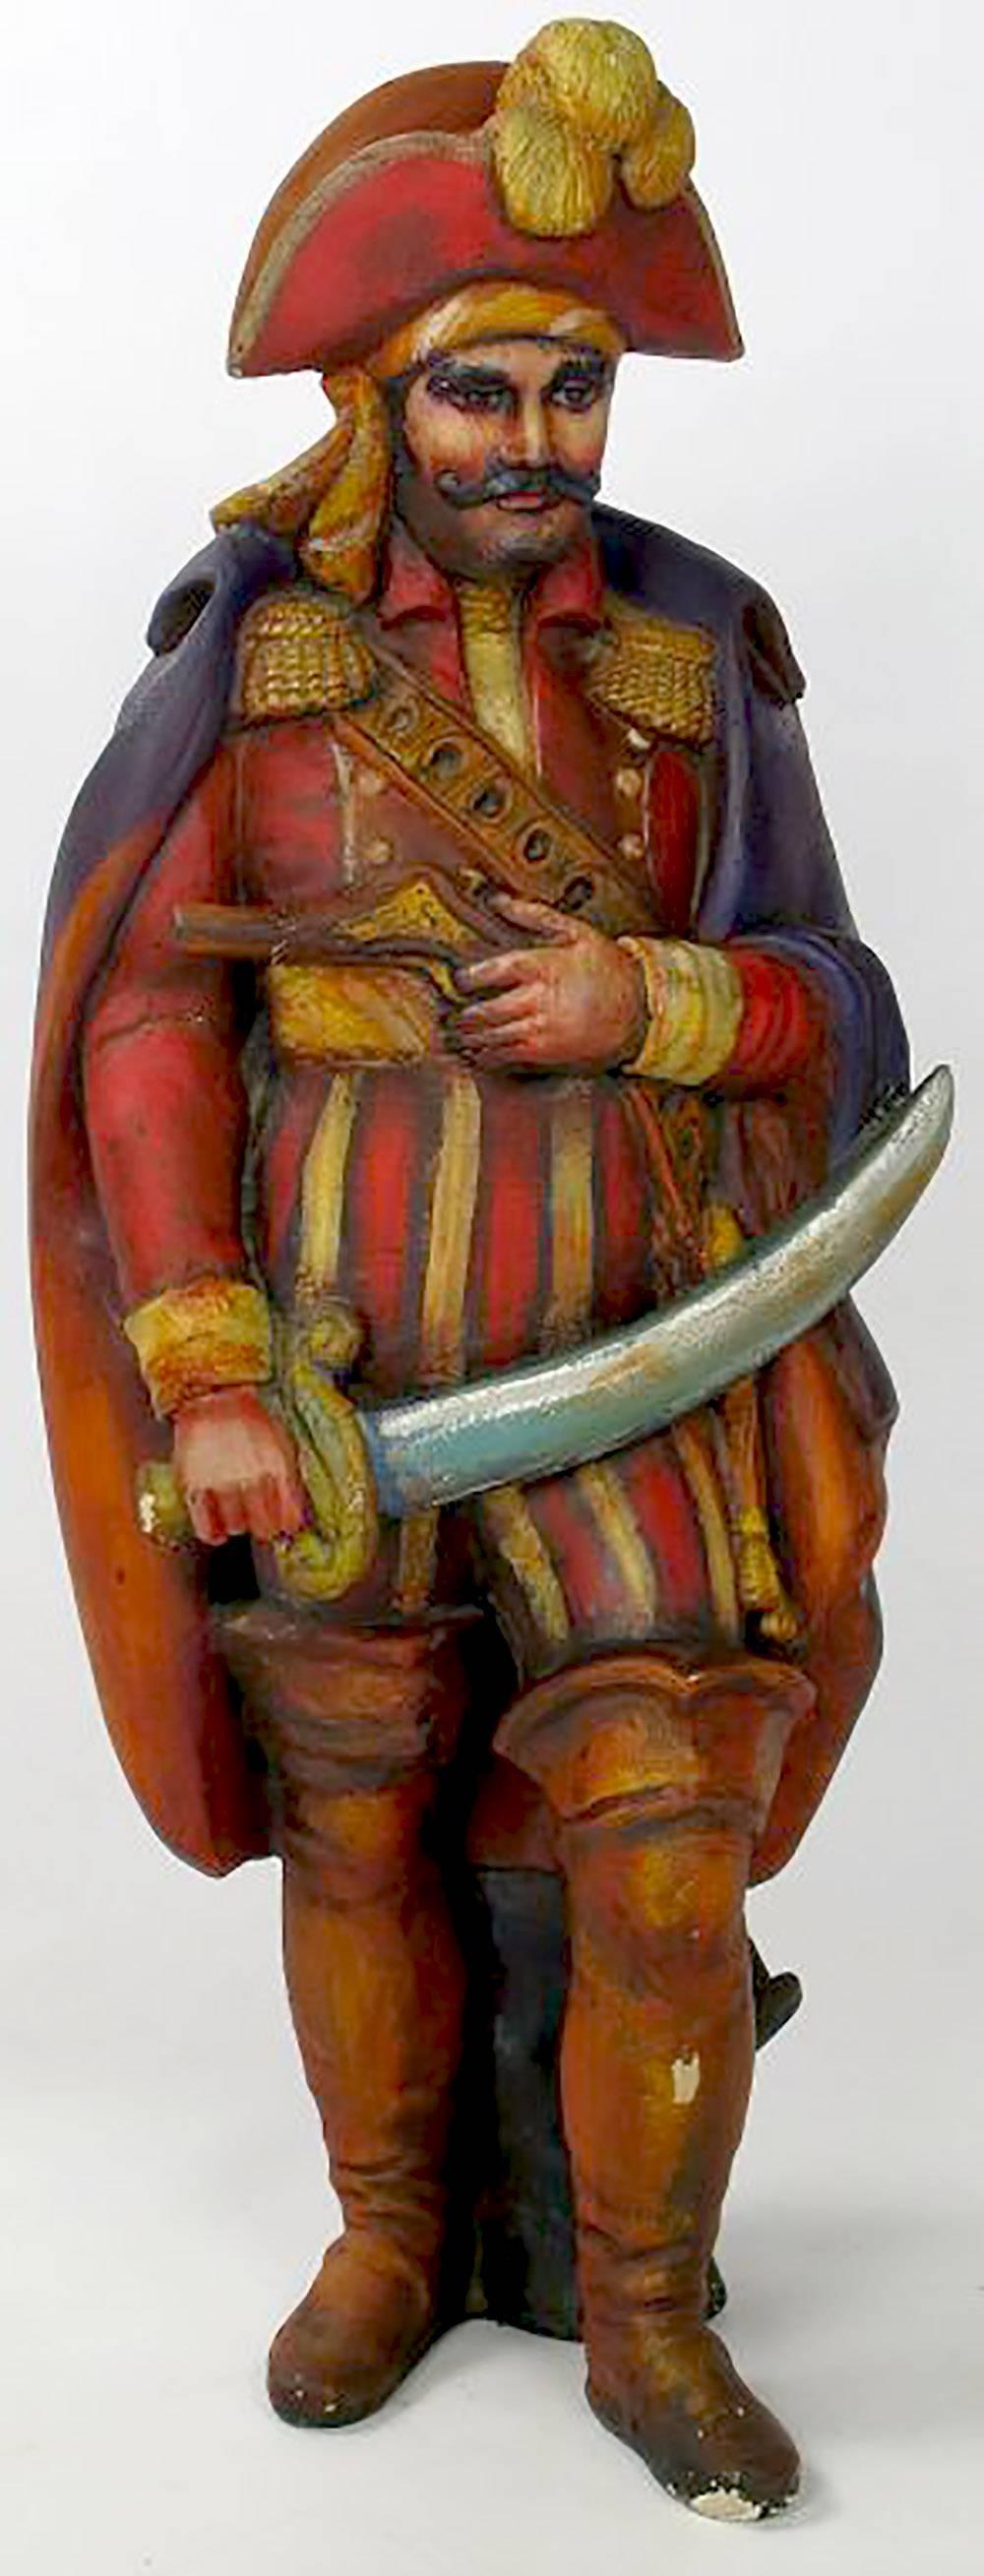 This colorful statue of the pirate, Jean Lafitte, was custom-made for the Chicago restaurant of the same name, which was open from the 1950s into the 1970s. Wonderful shades of red, yellow, orange and purple. Brandishing a flintlock pistol and a